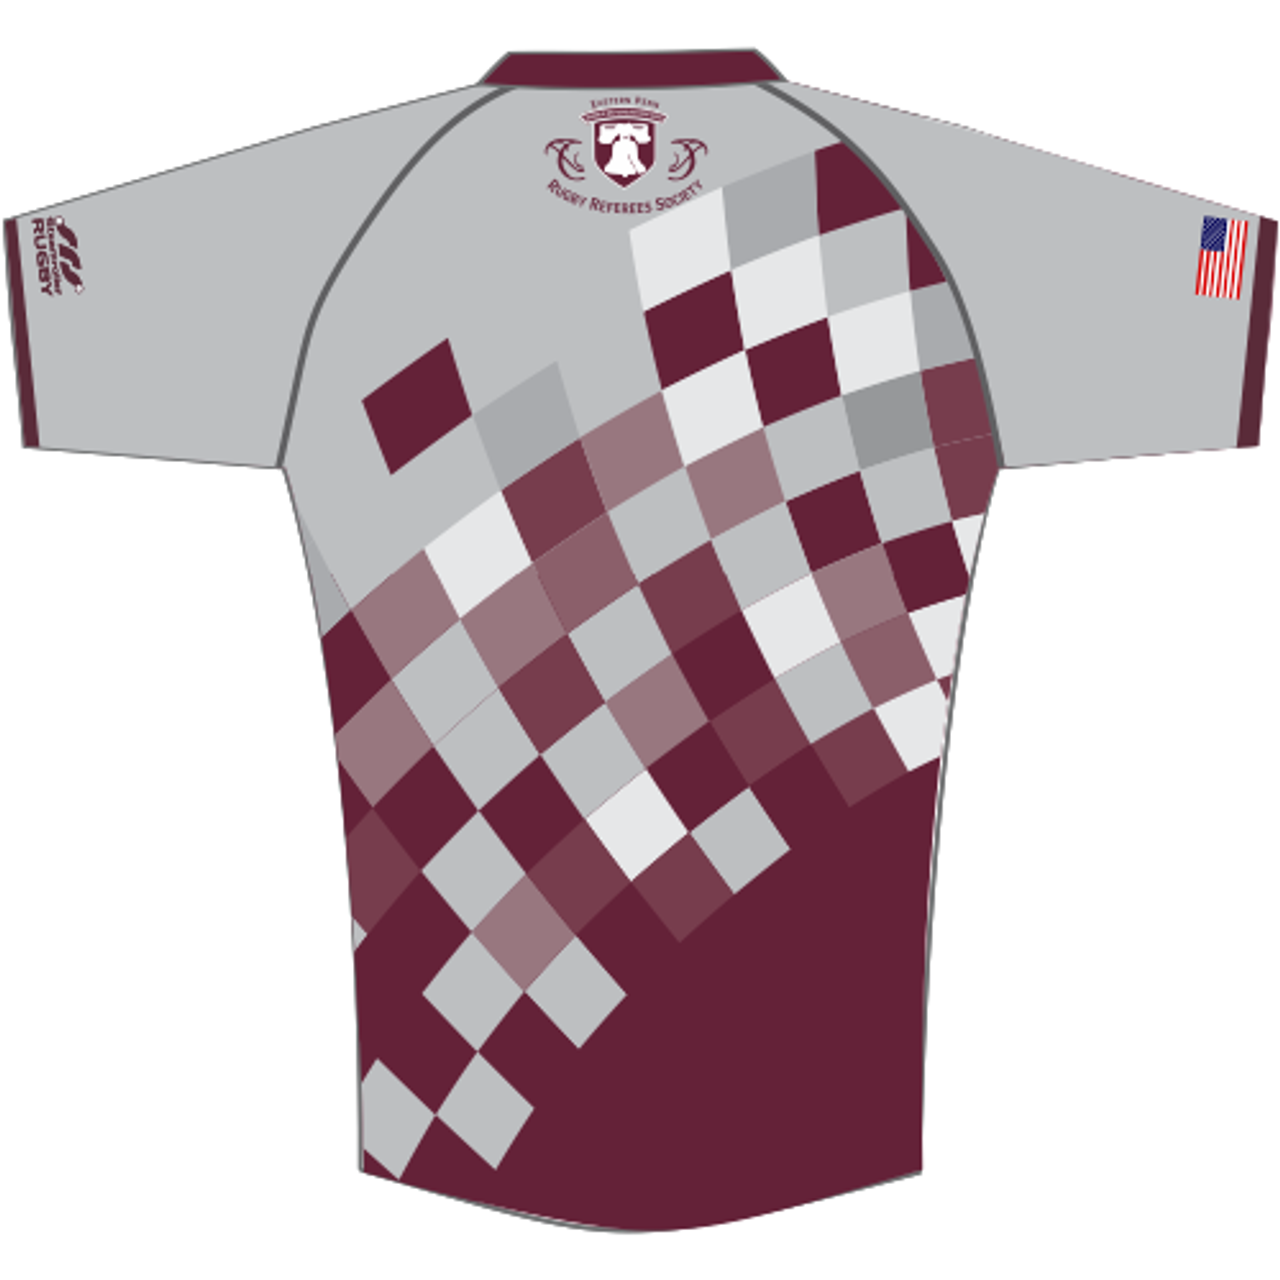 EPRRS 2018/2019 Loose-Cut Jersey, Gray/Maroon